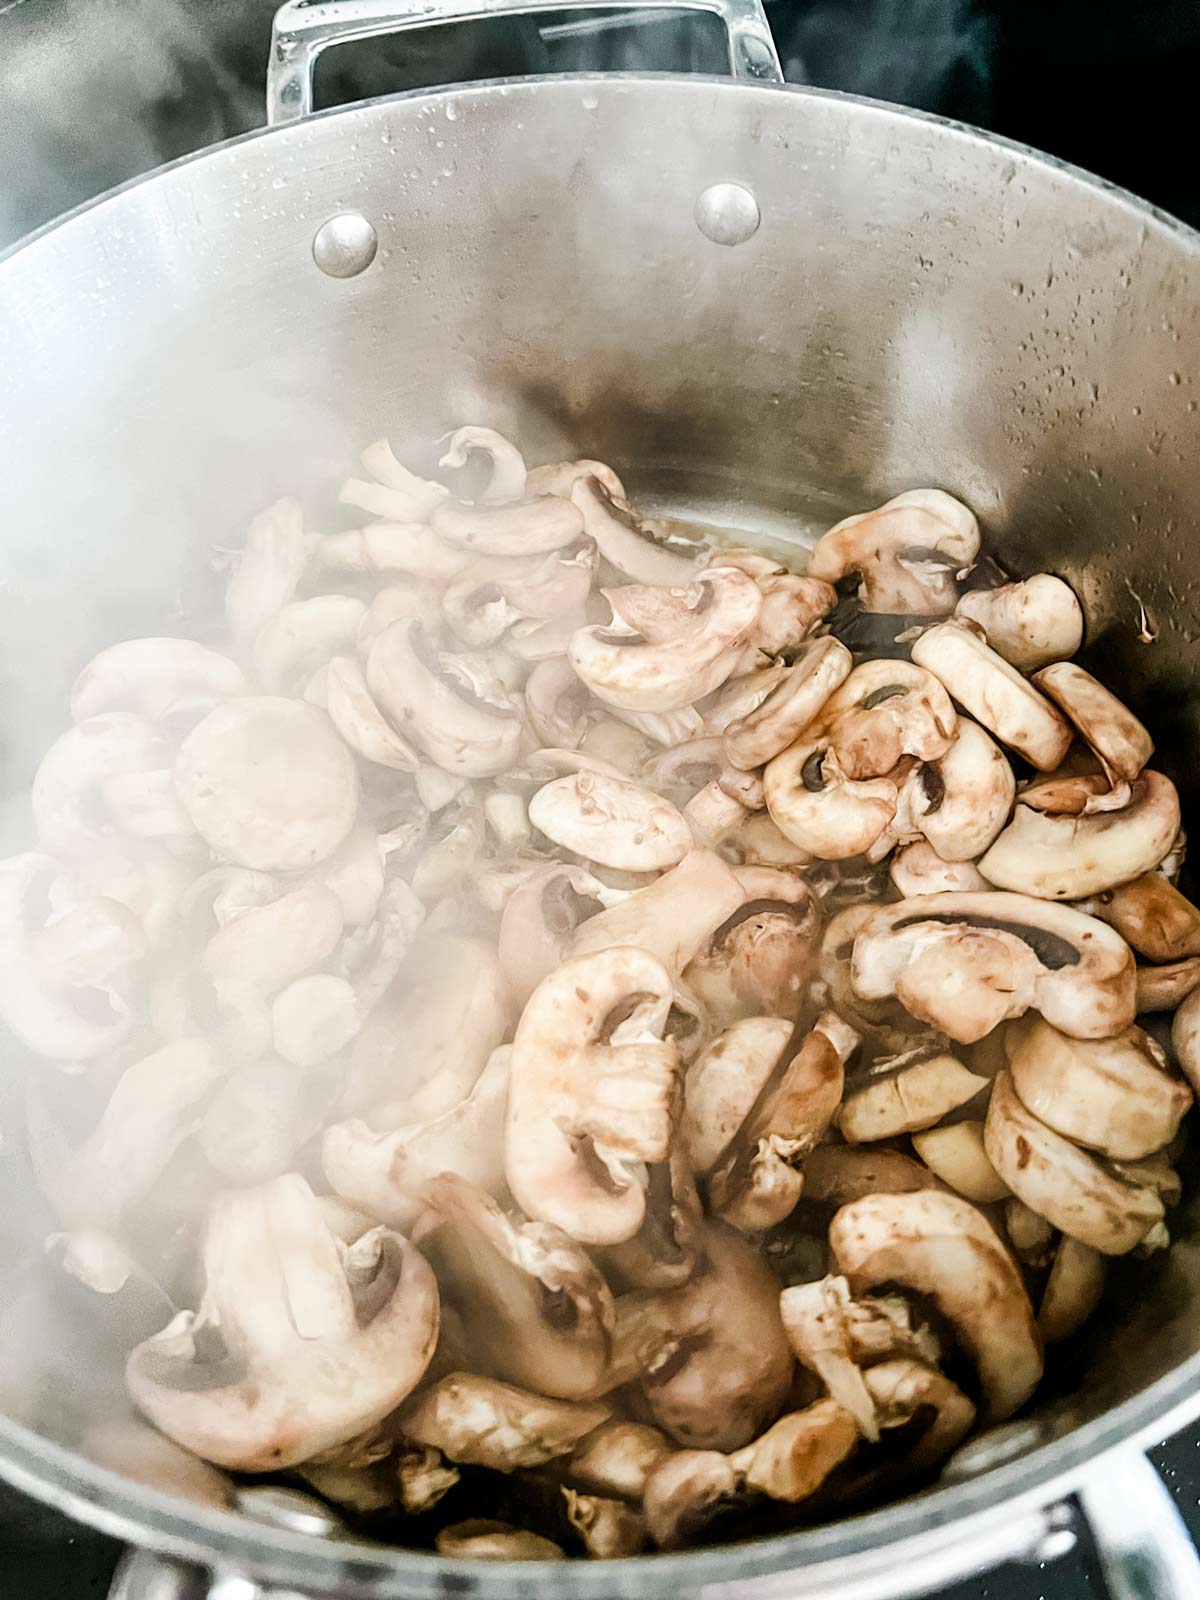 Mushrooms cooking in a large pot.